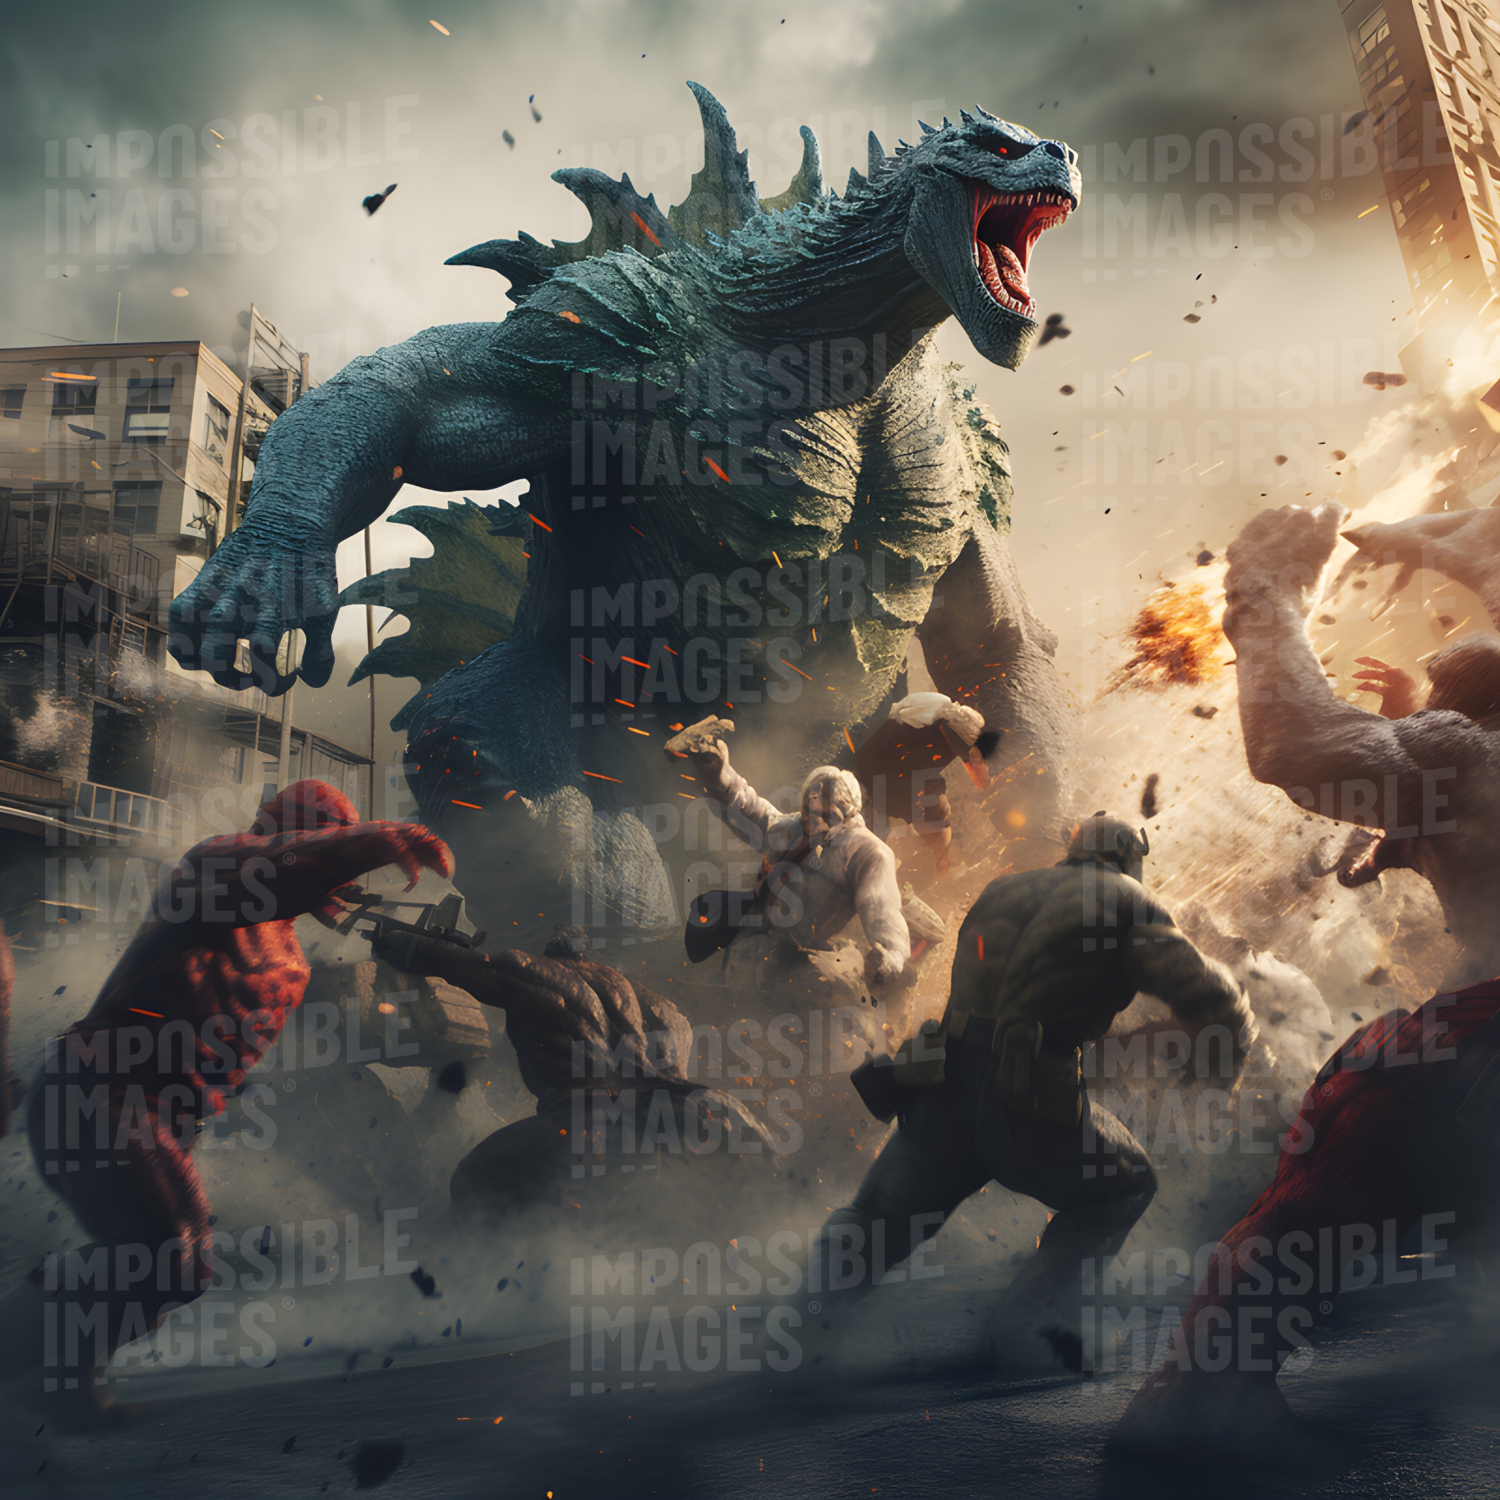 Kaiju battling muscular mutant superheroes on a city street -  Gigantic monsters and powerful mutants clash in an epic battle on the streets of a city, with the fate of the world hanging in the balance.